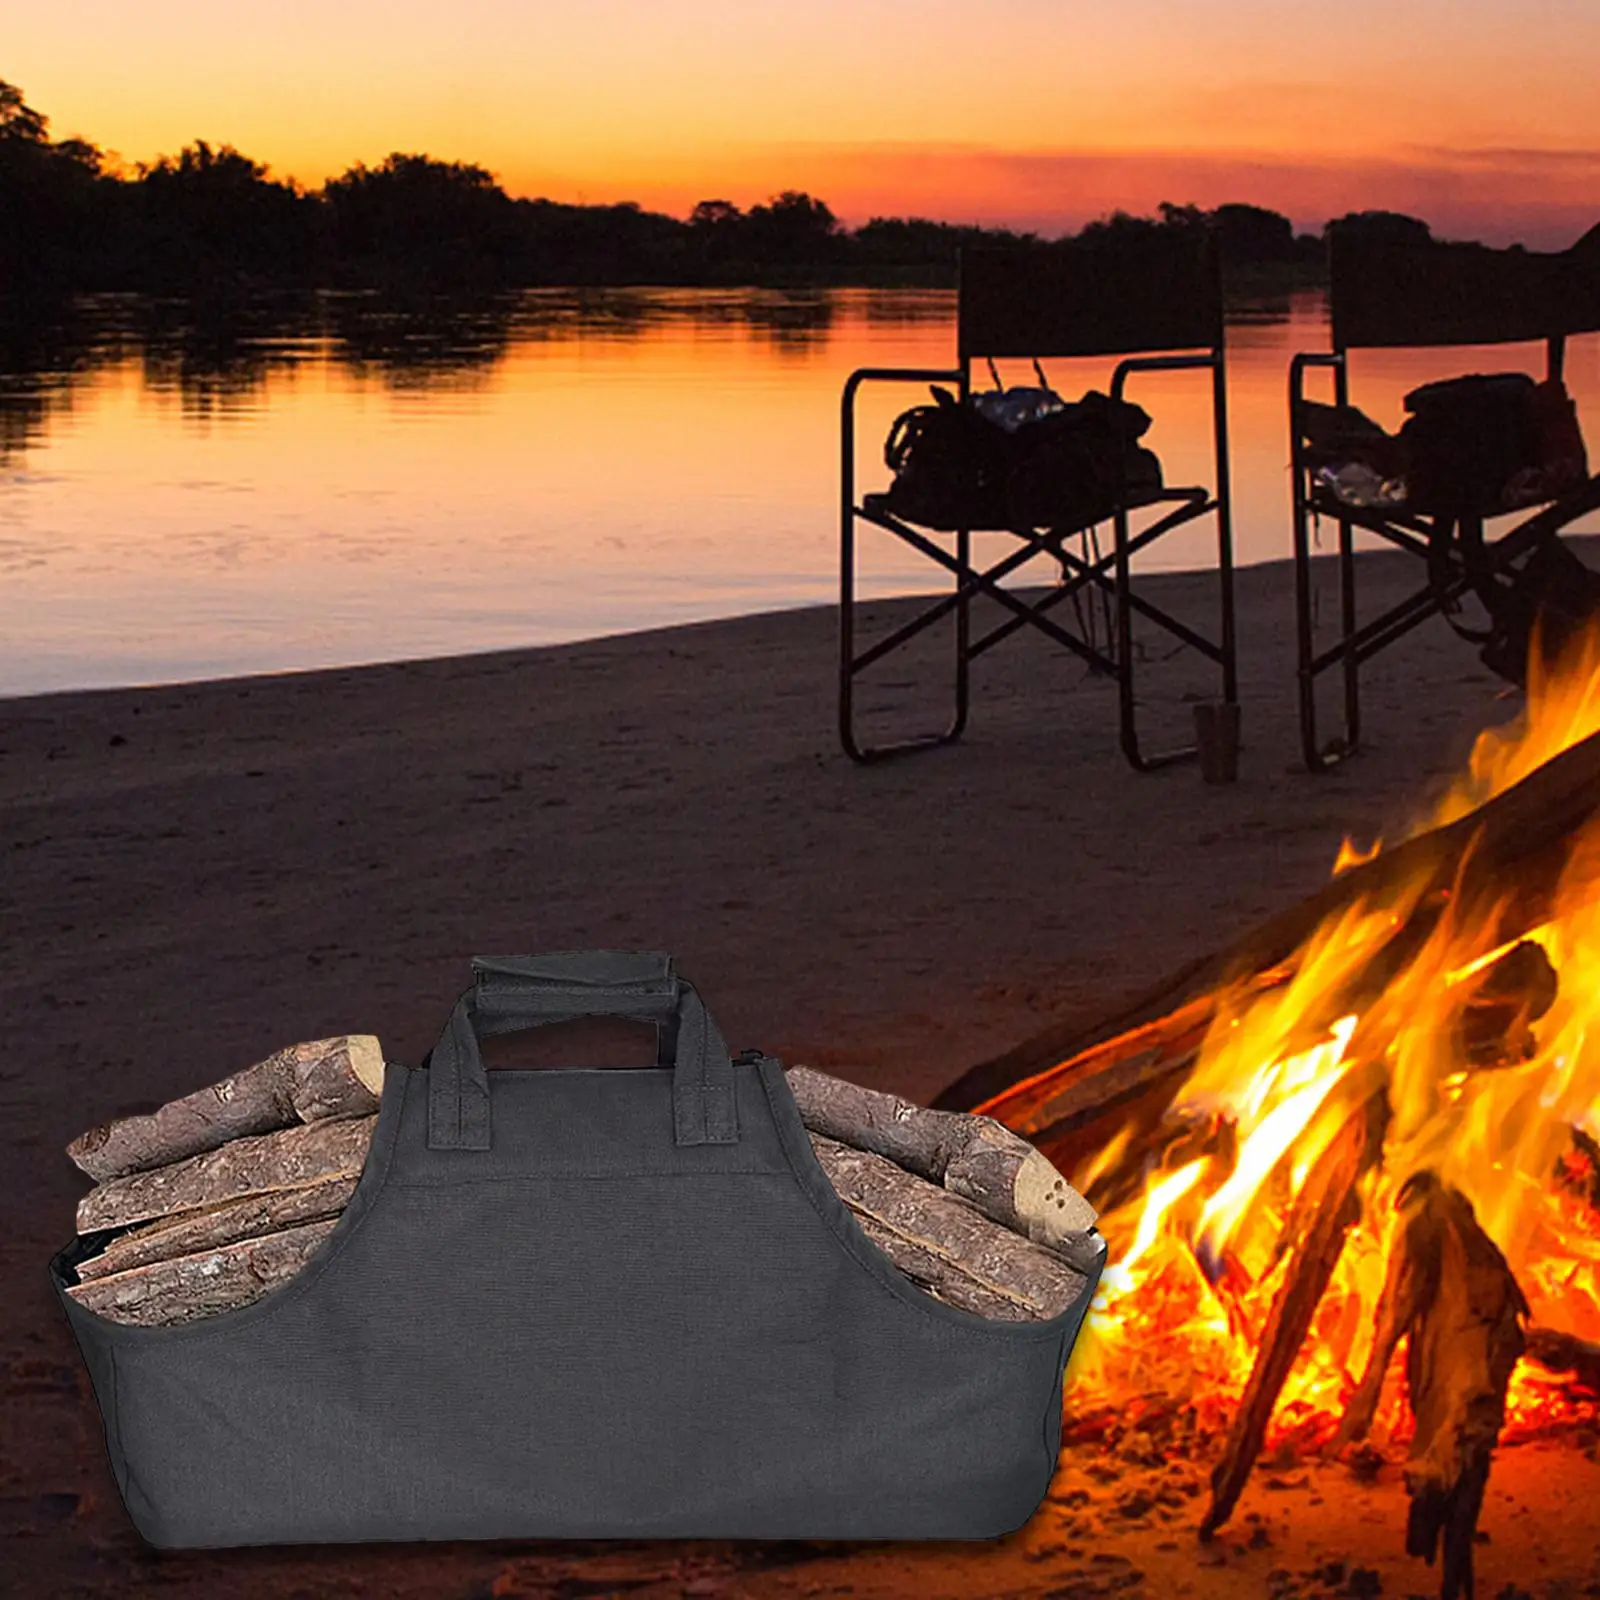 Large Fire Tote Bag Hearth Stove Tool Durable Foldable Firewood Log Carrier Tote Bag for Outdoor Home Camping Garden Picnics